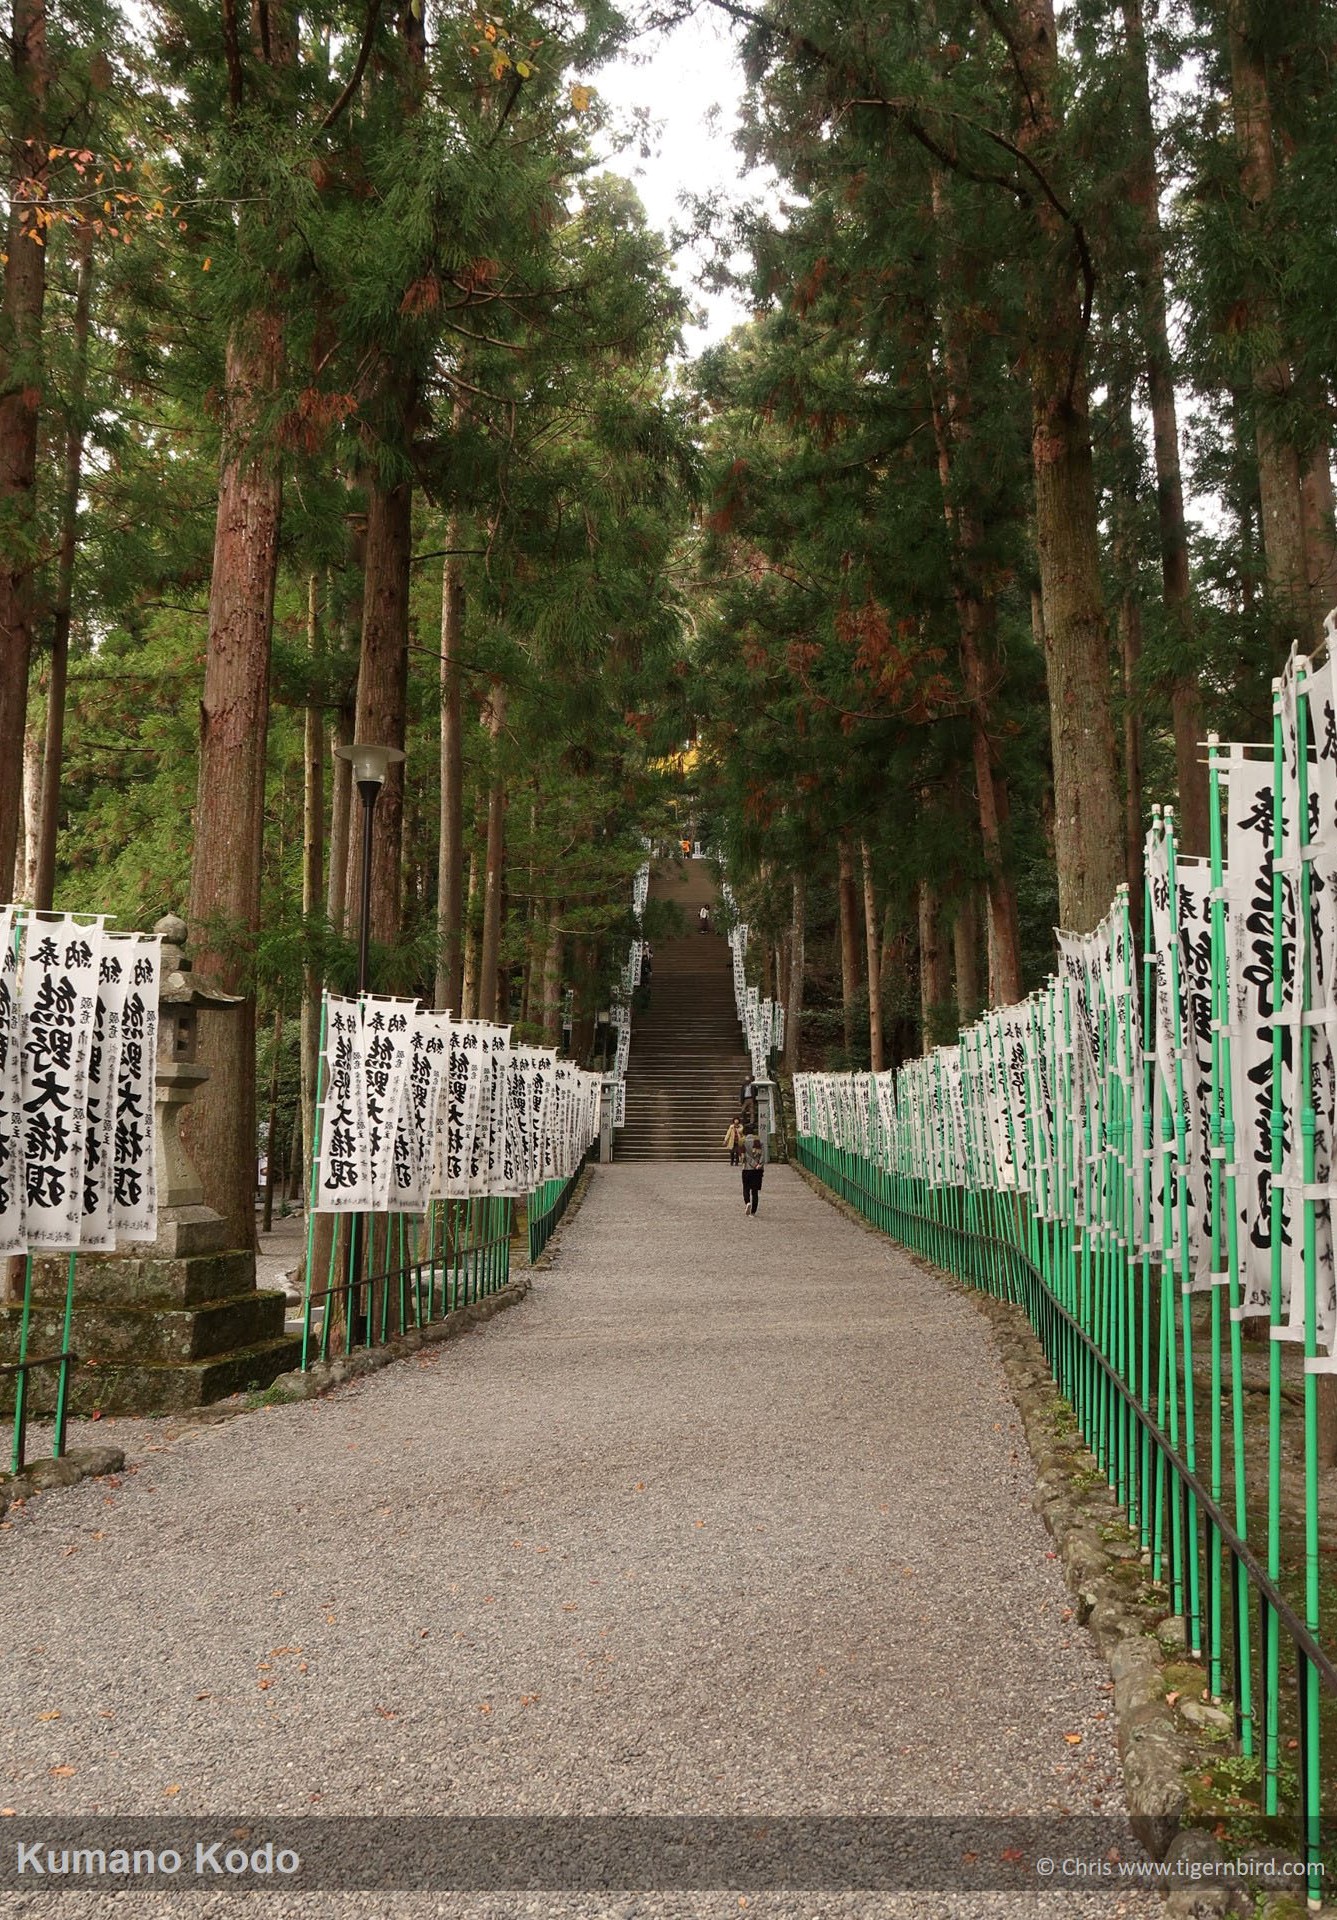 Entrance to temple along the Kumano Kodo trail in Japan